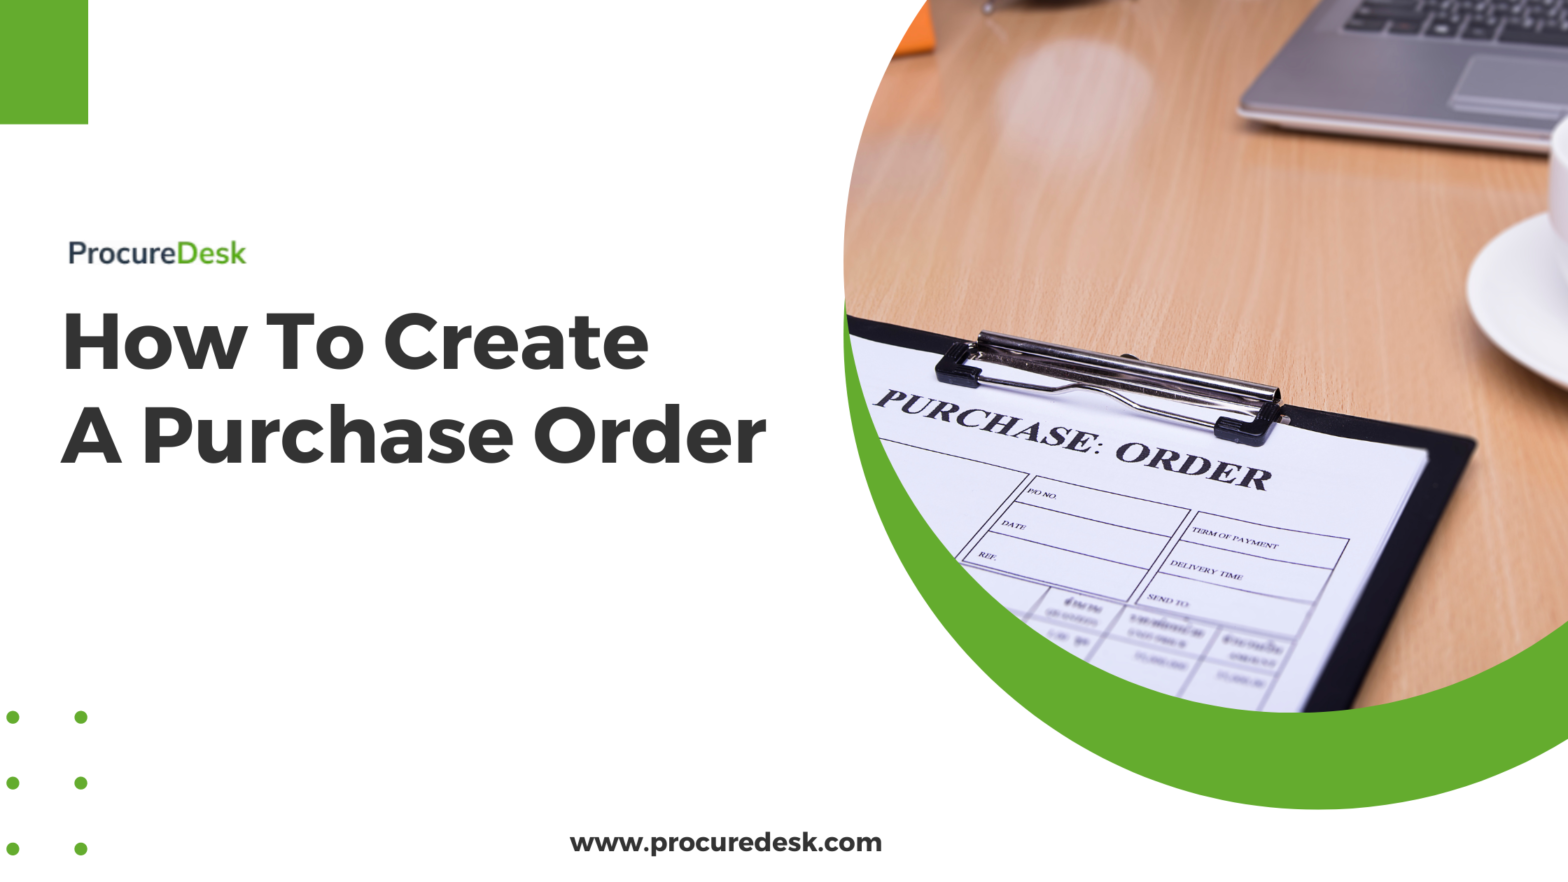 How To Create A Purchase Order